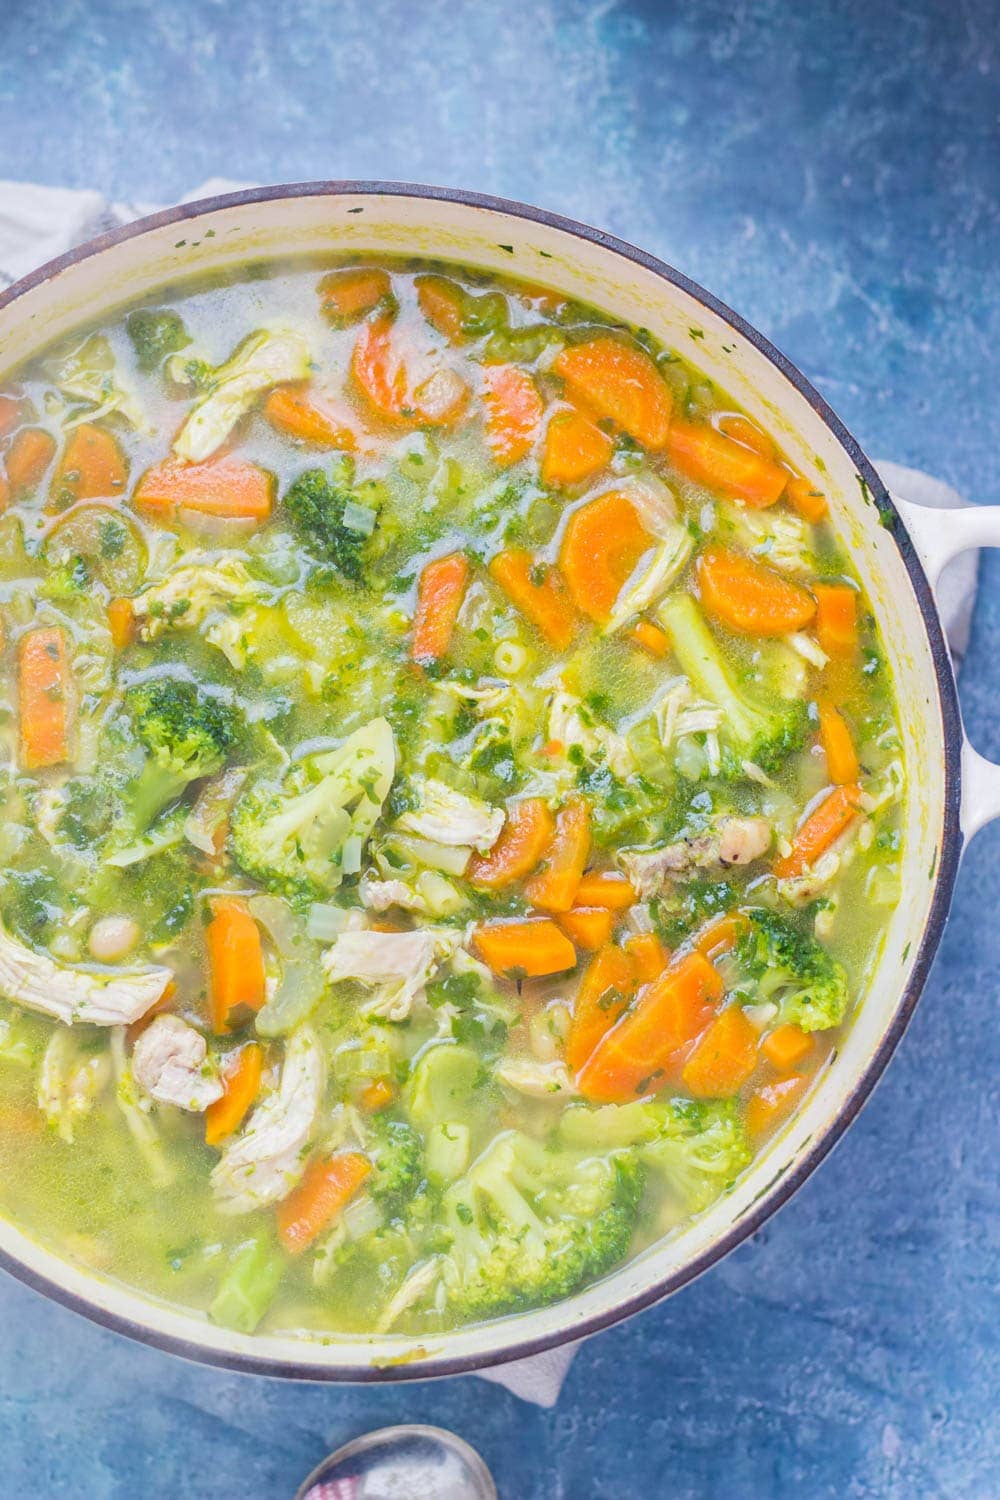 White pot of soup with broccoli and chicken